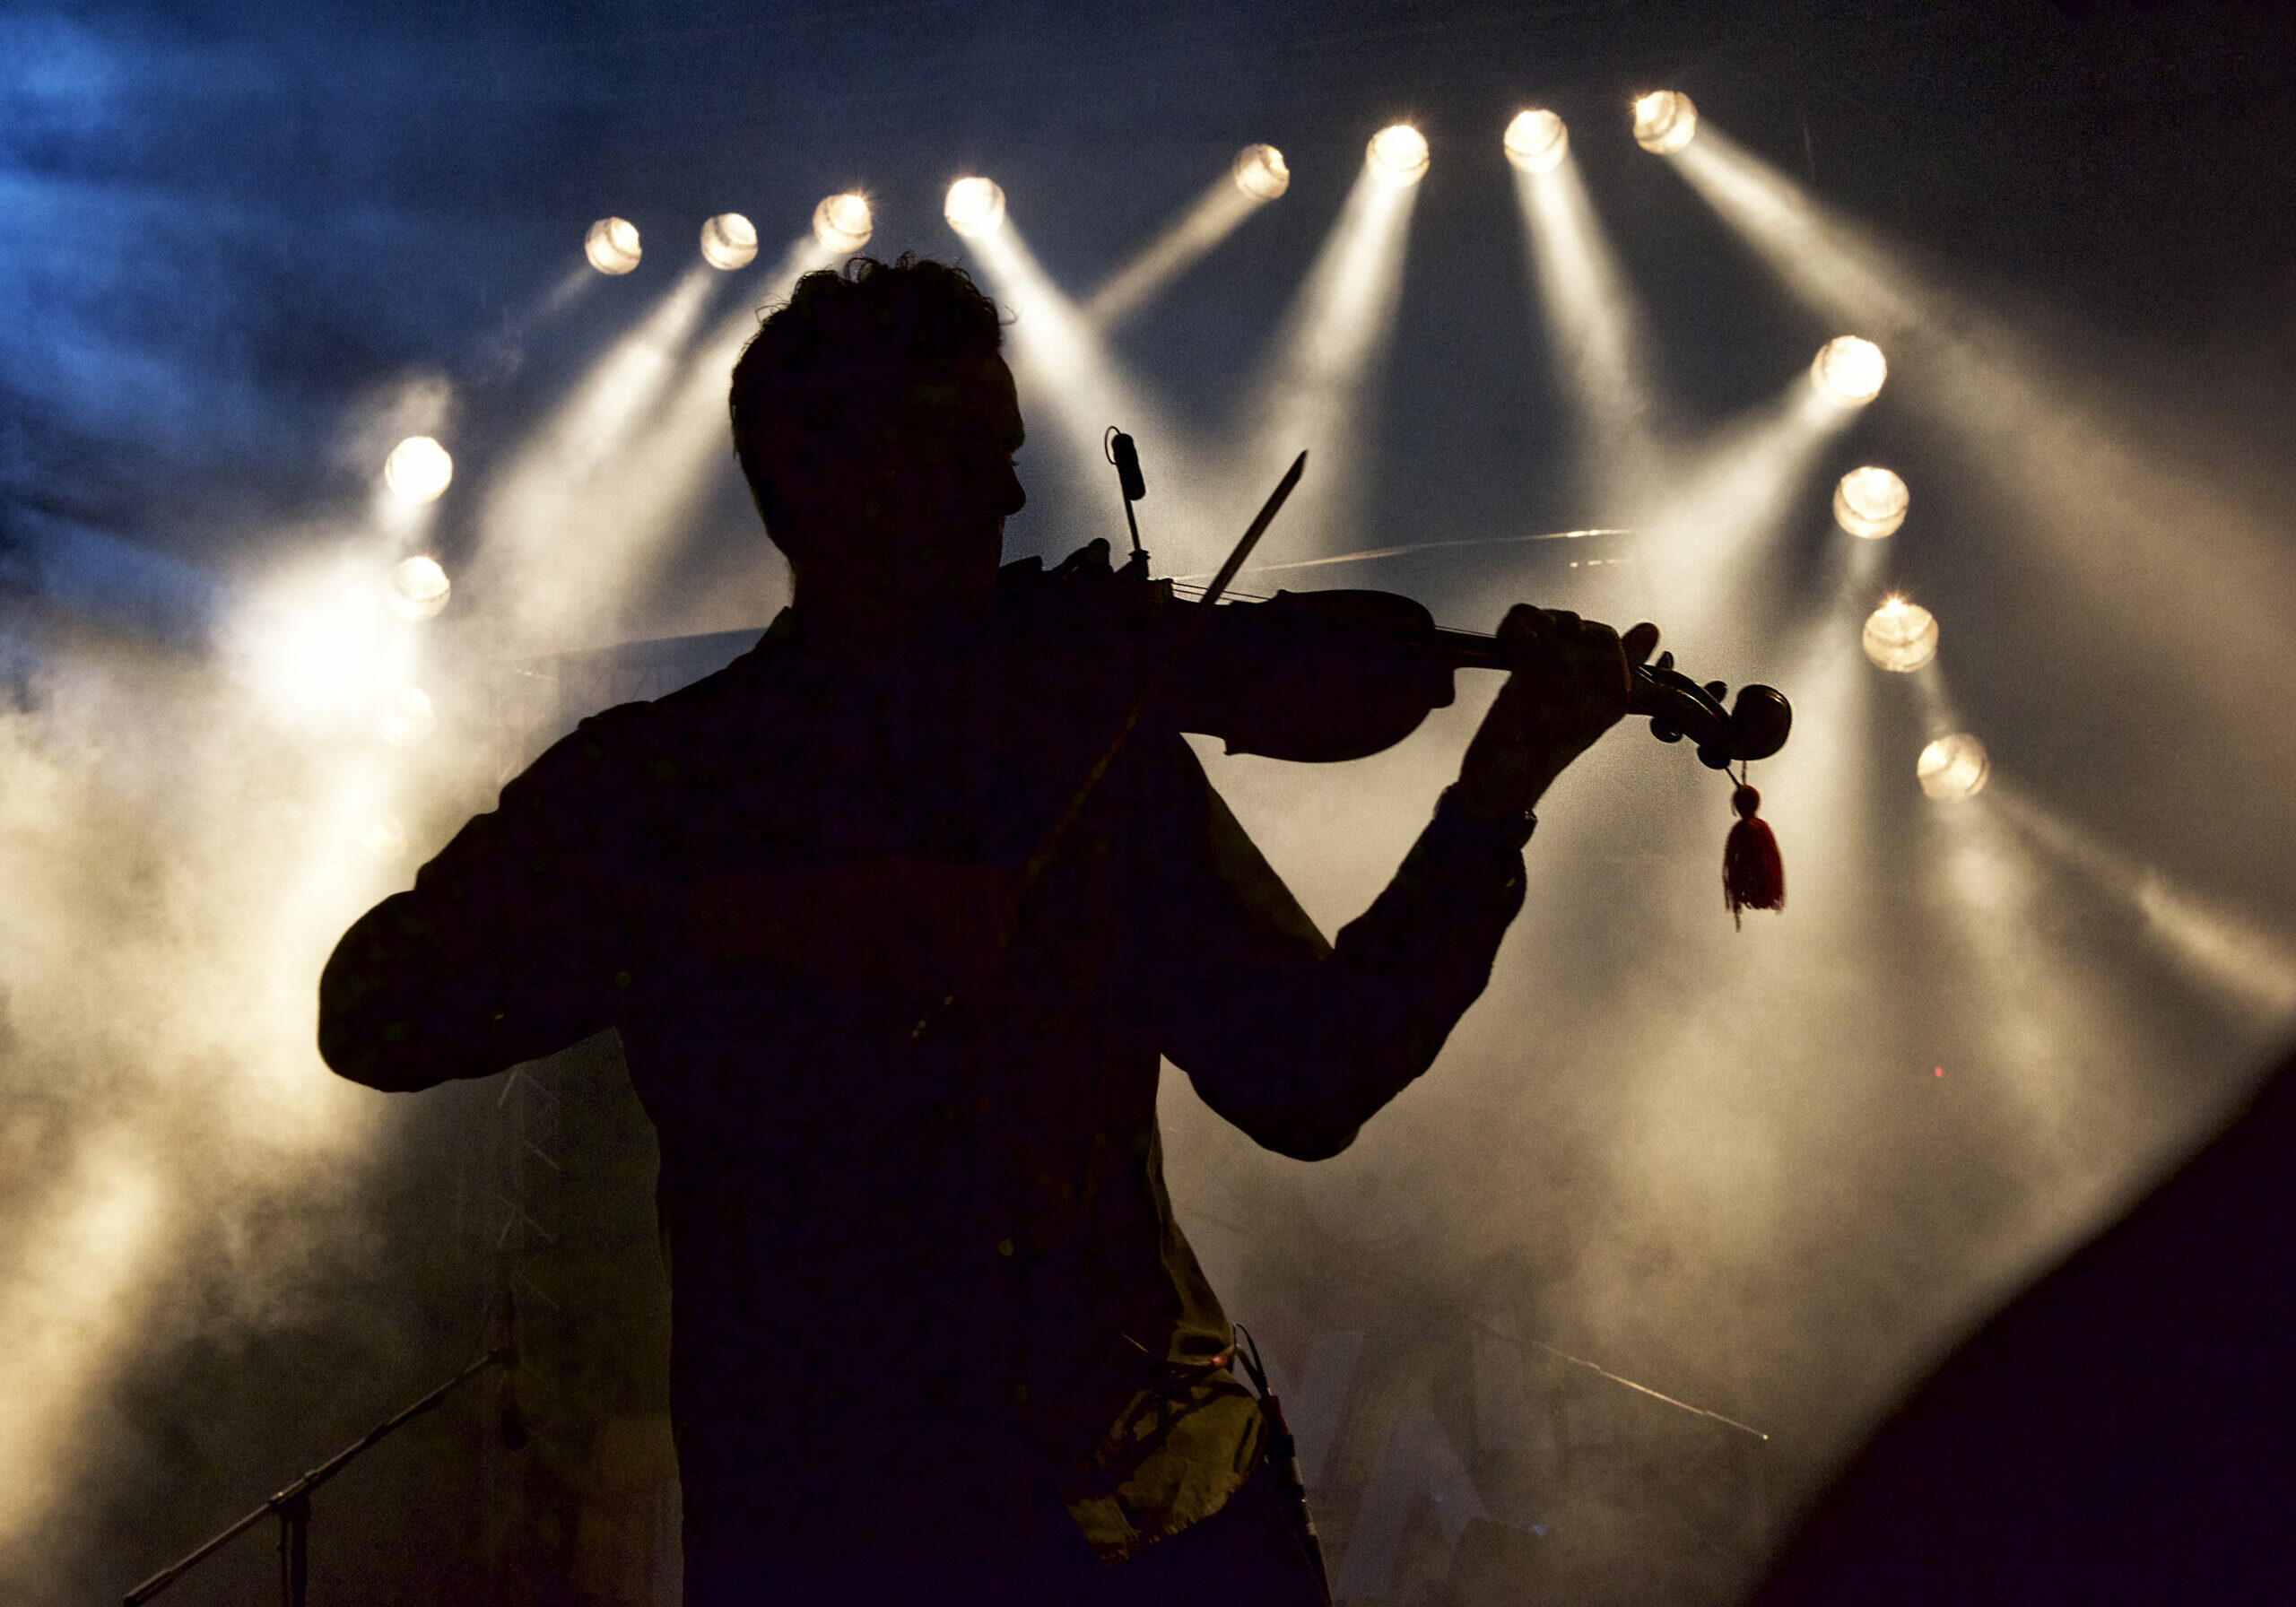 Silhouette of a man on stage playing the violin